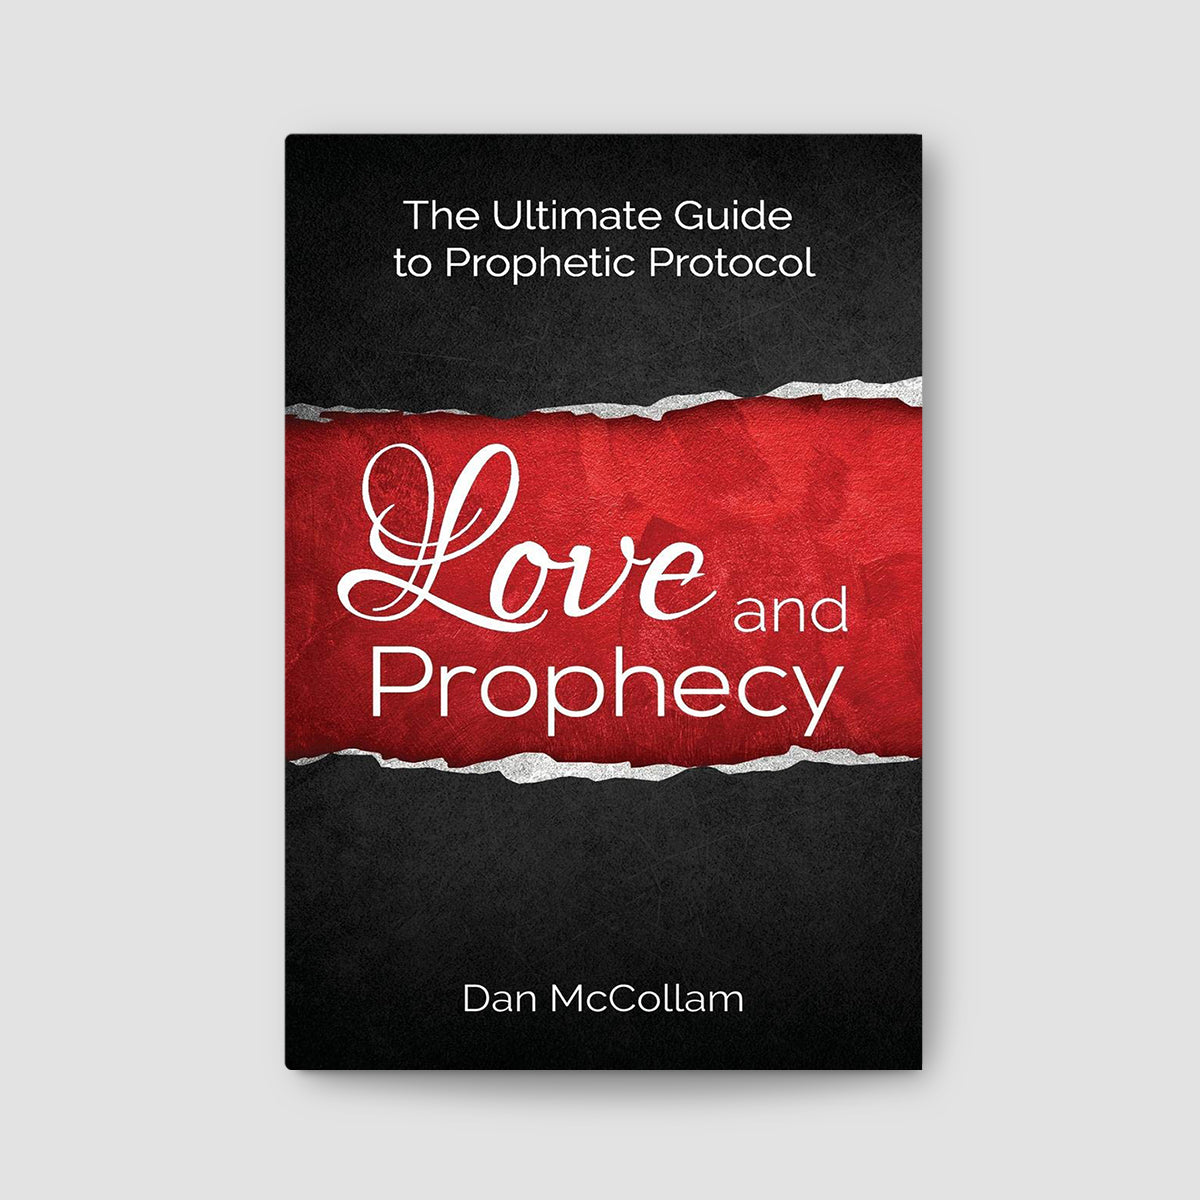 Love and Prophecy: The Ultimate Guide to Prophetic Protocol